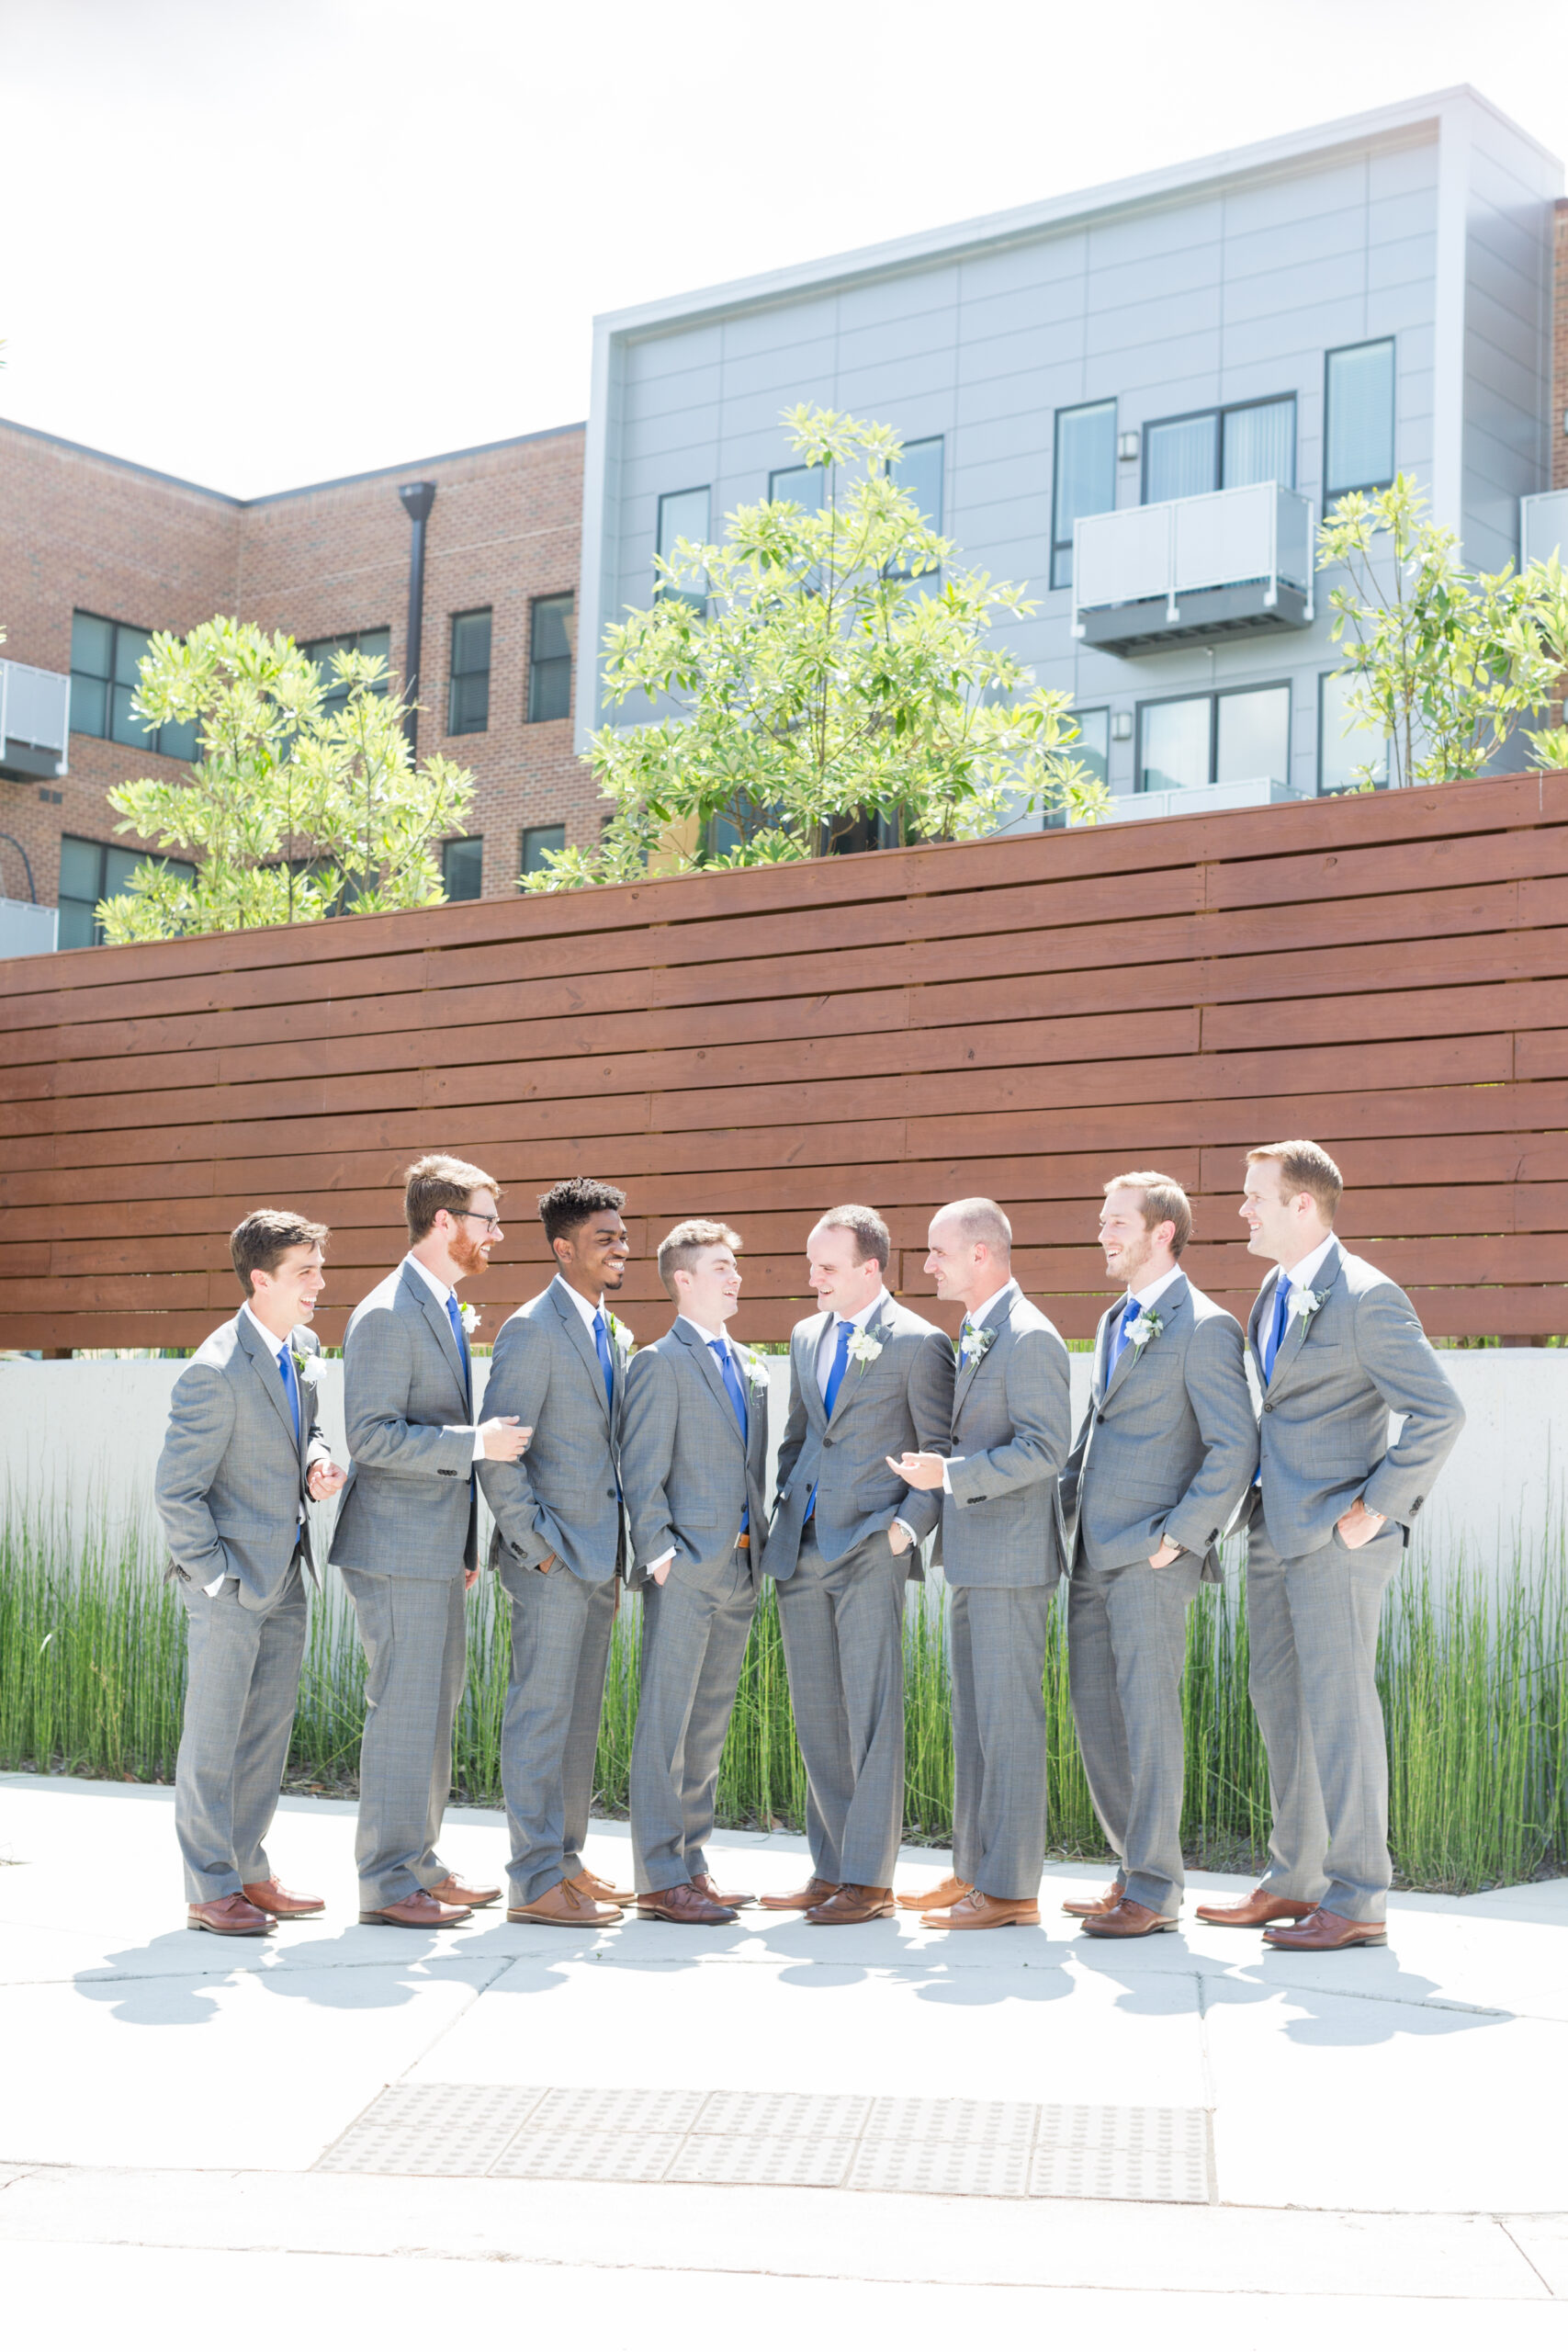  Look at our groom and his groomsmen looking quite dapper! 